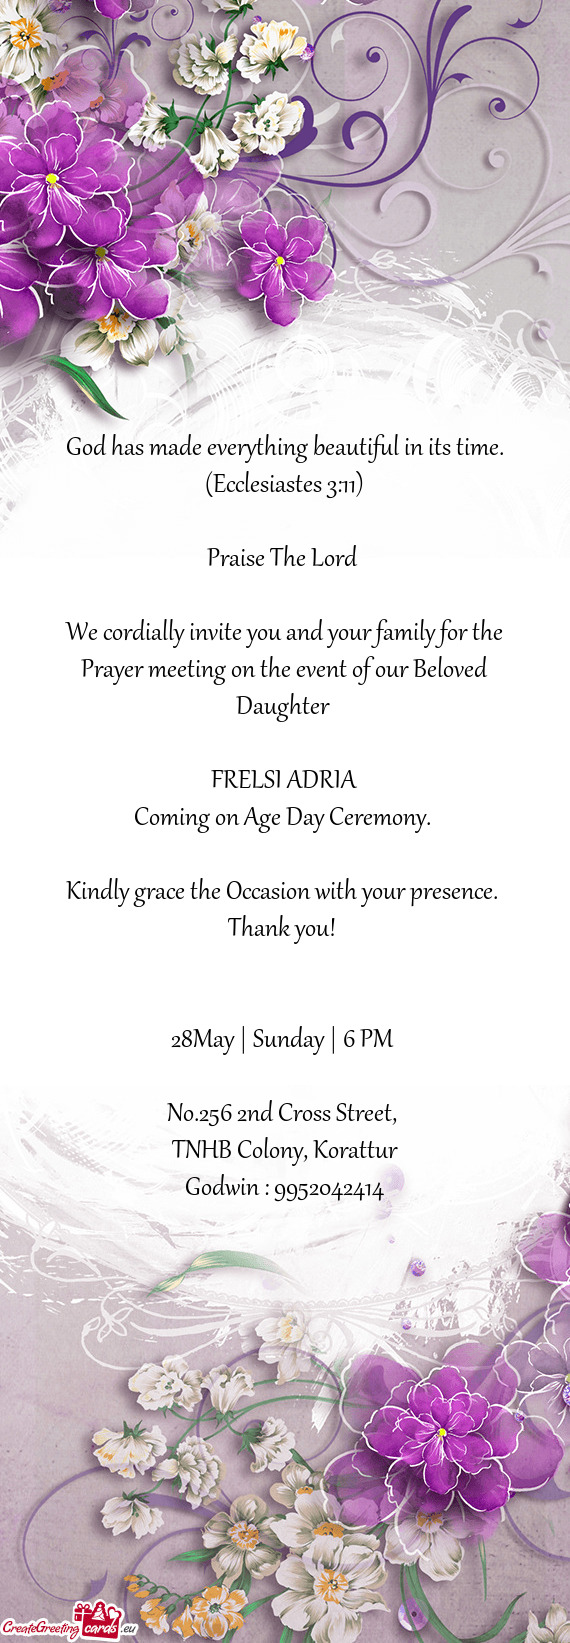 We cordially invite you and your family for the Prayer meeting on the event of our Beloved Daughter